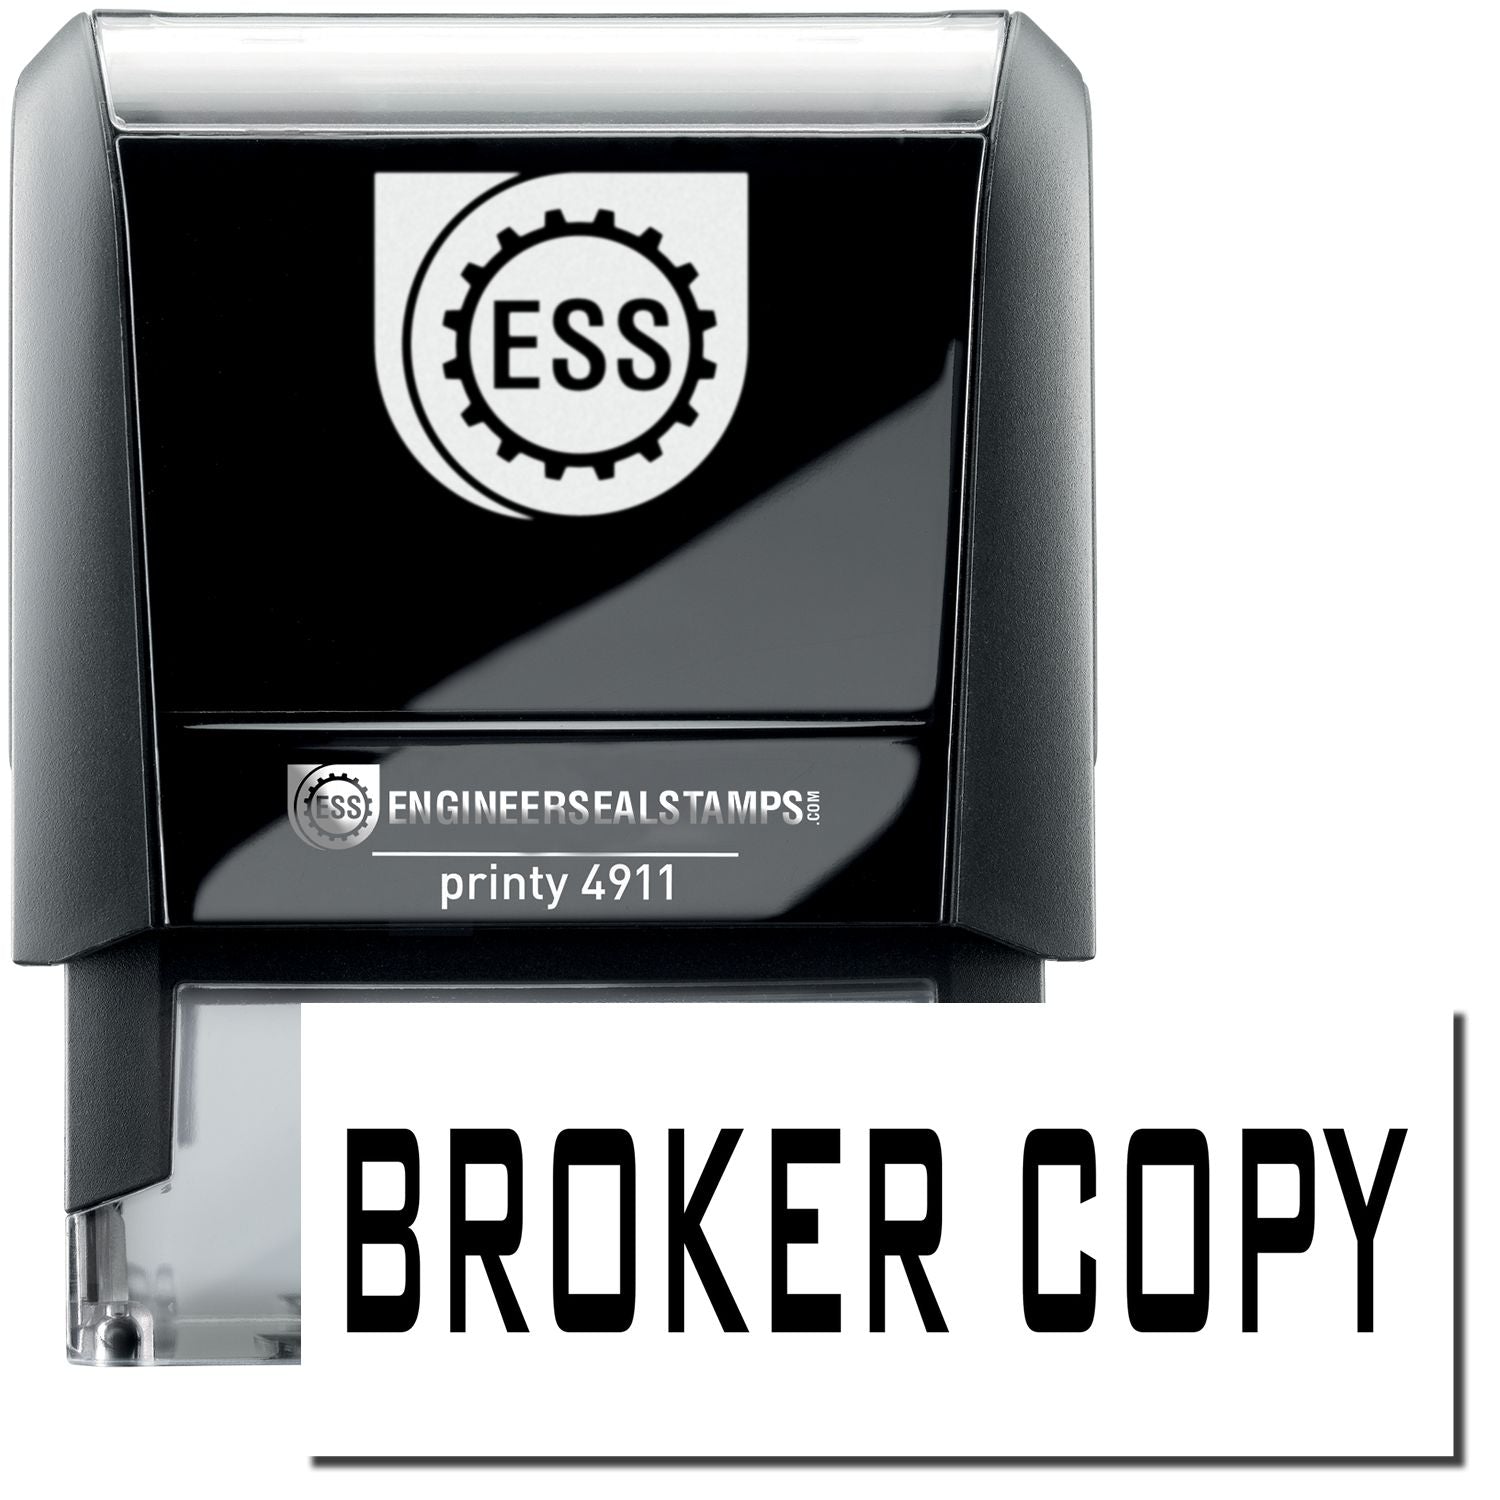 A self-inking stamp with a stamped image showing how the text "BROKER COPY" is displayed after stamping.